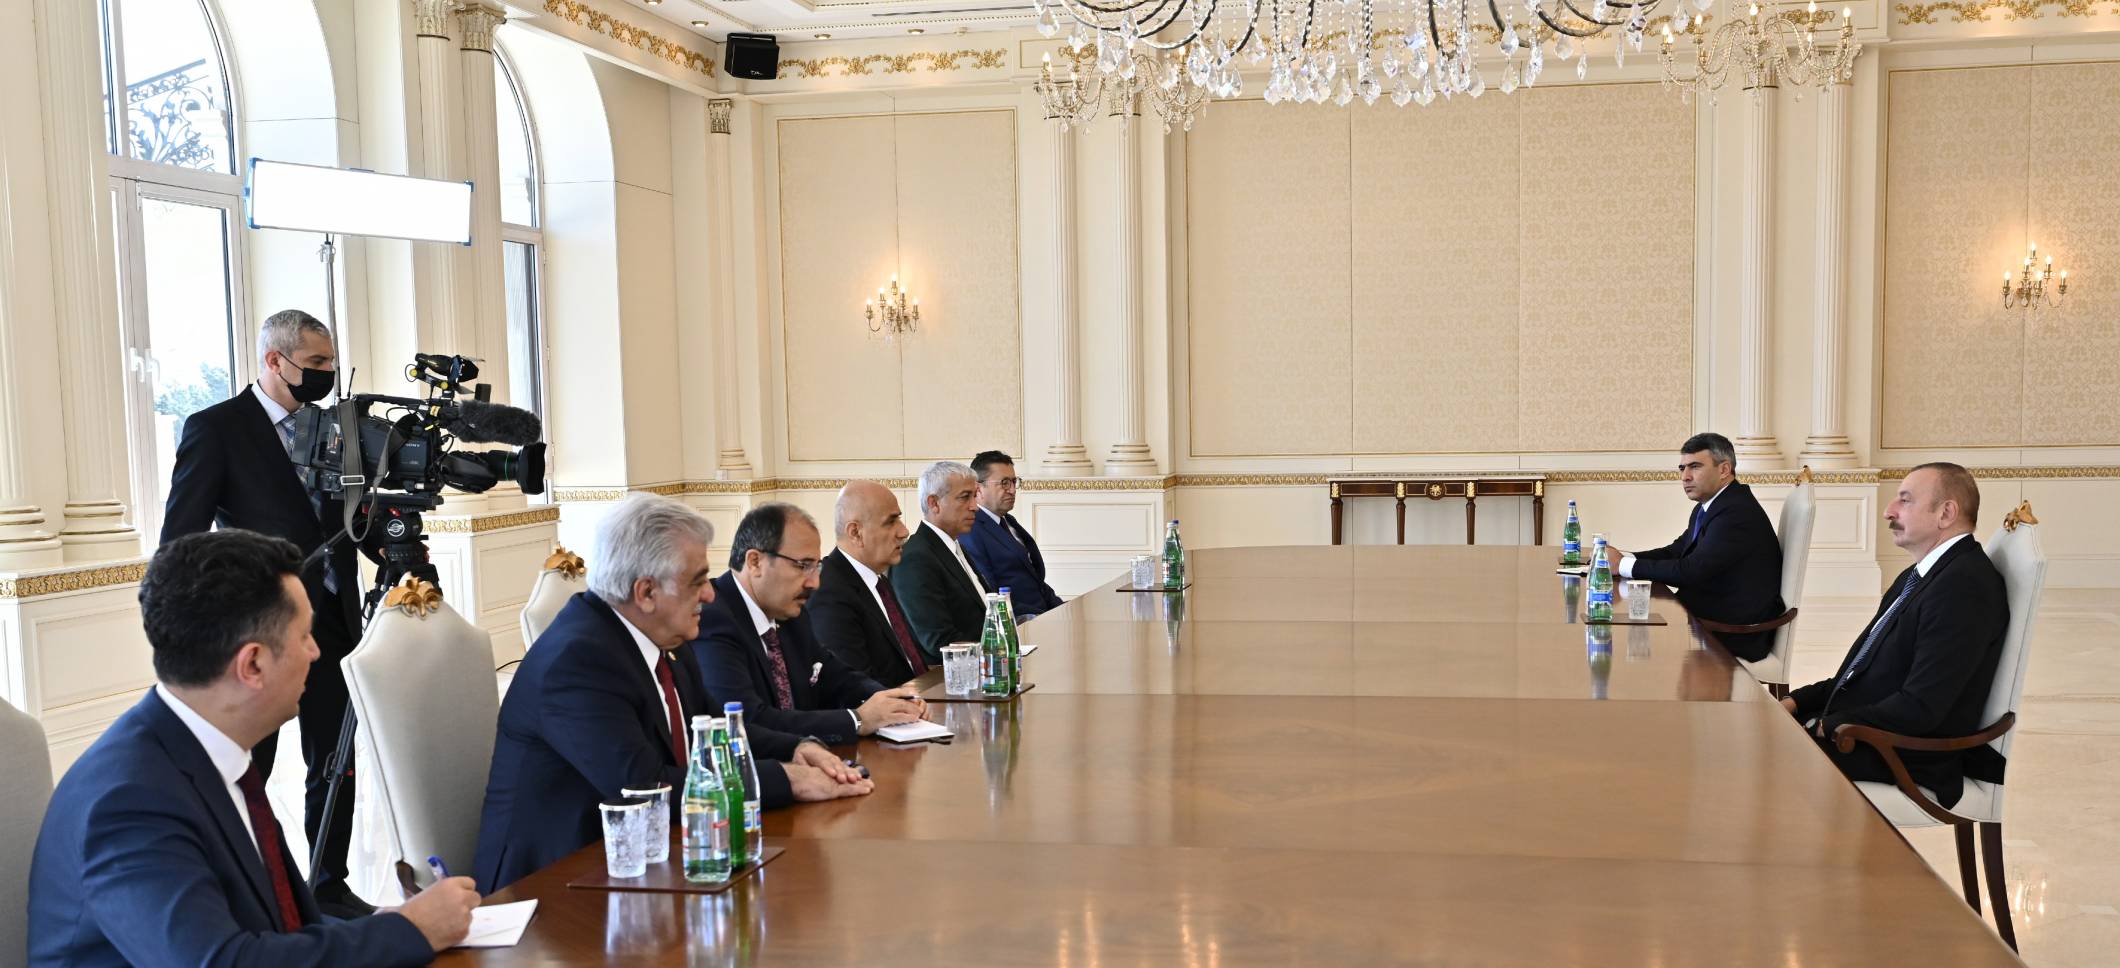 Ilham Aliyev has received a delegation led by Minister of Agriculture and Forestry of the Republic of Turkiye Vahit Kirisci